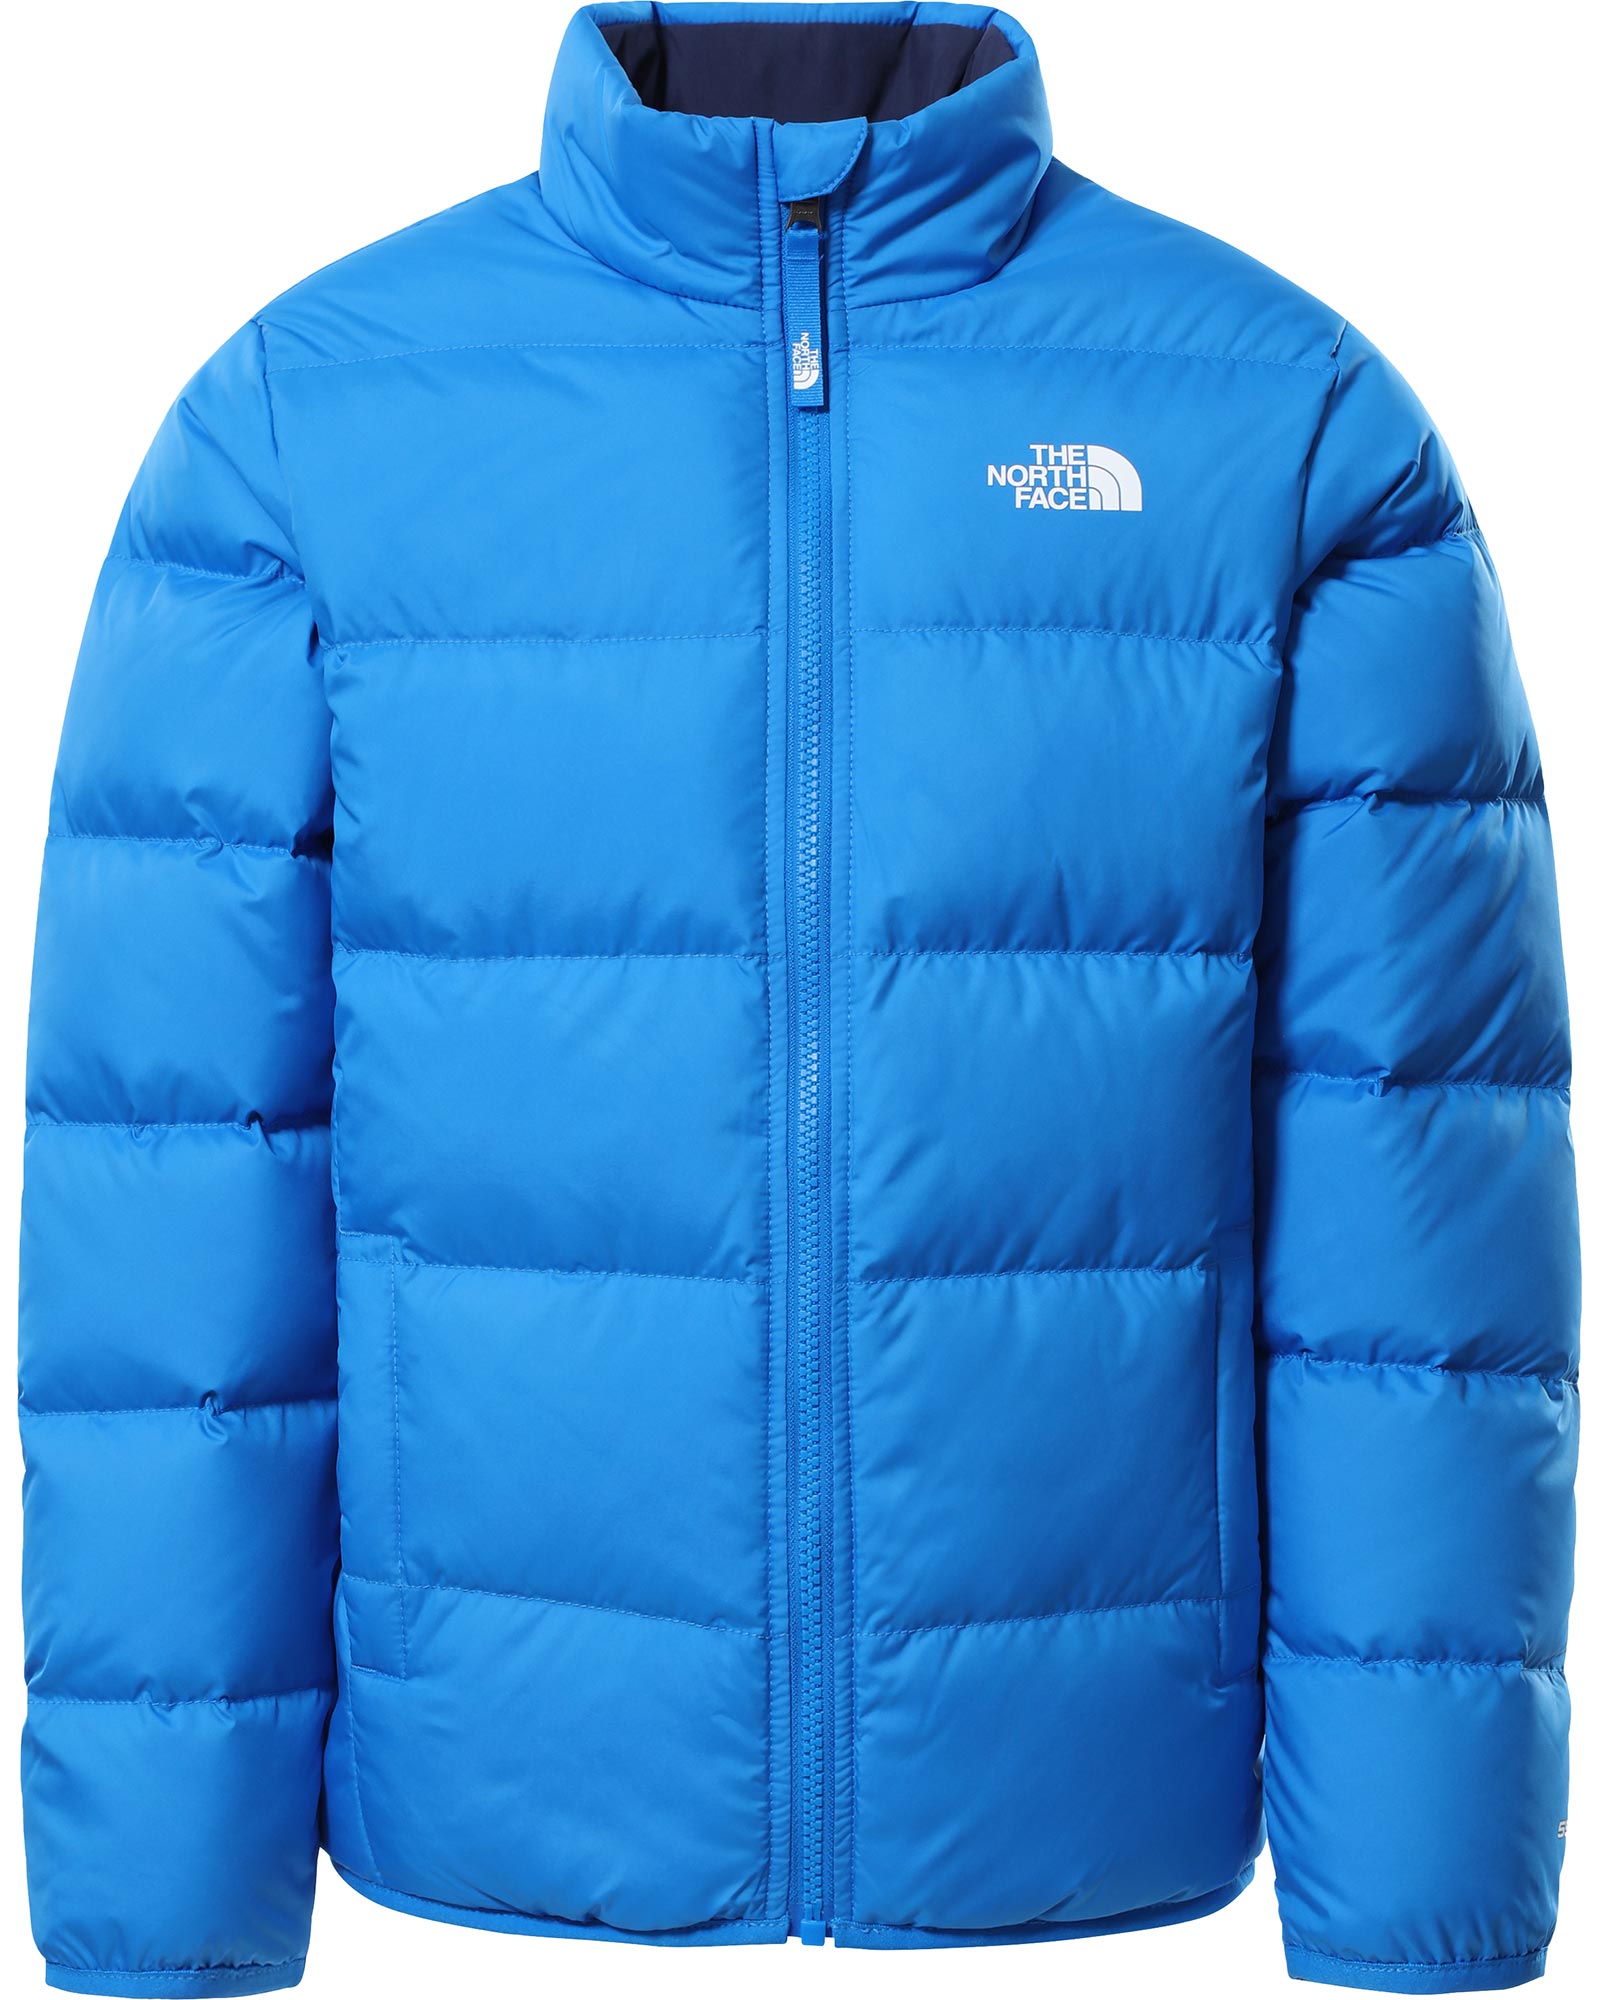 The North Face Reversible Andes Boys’ Jacket - Hero Blue L